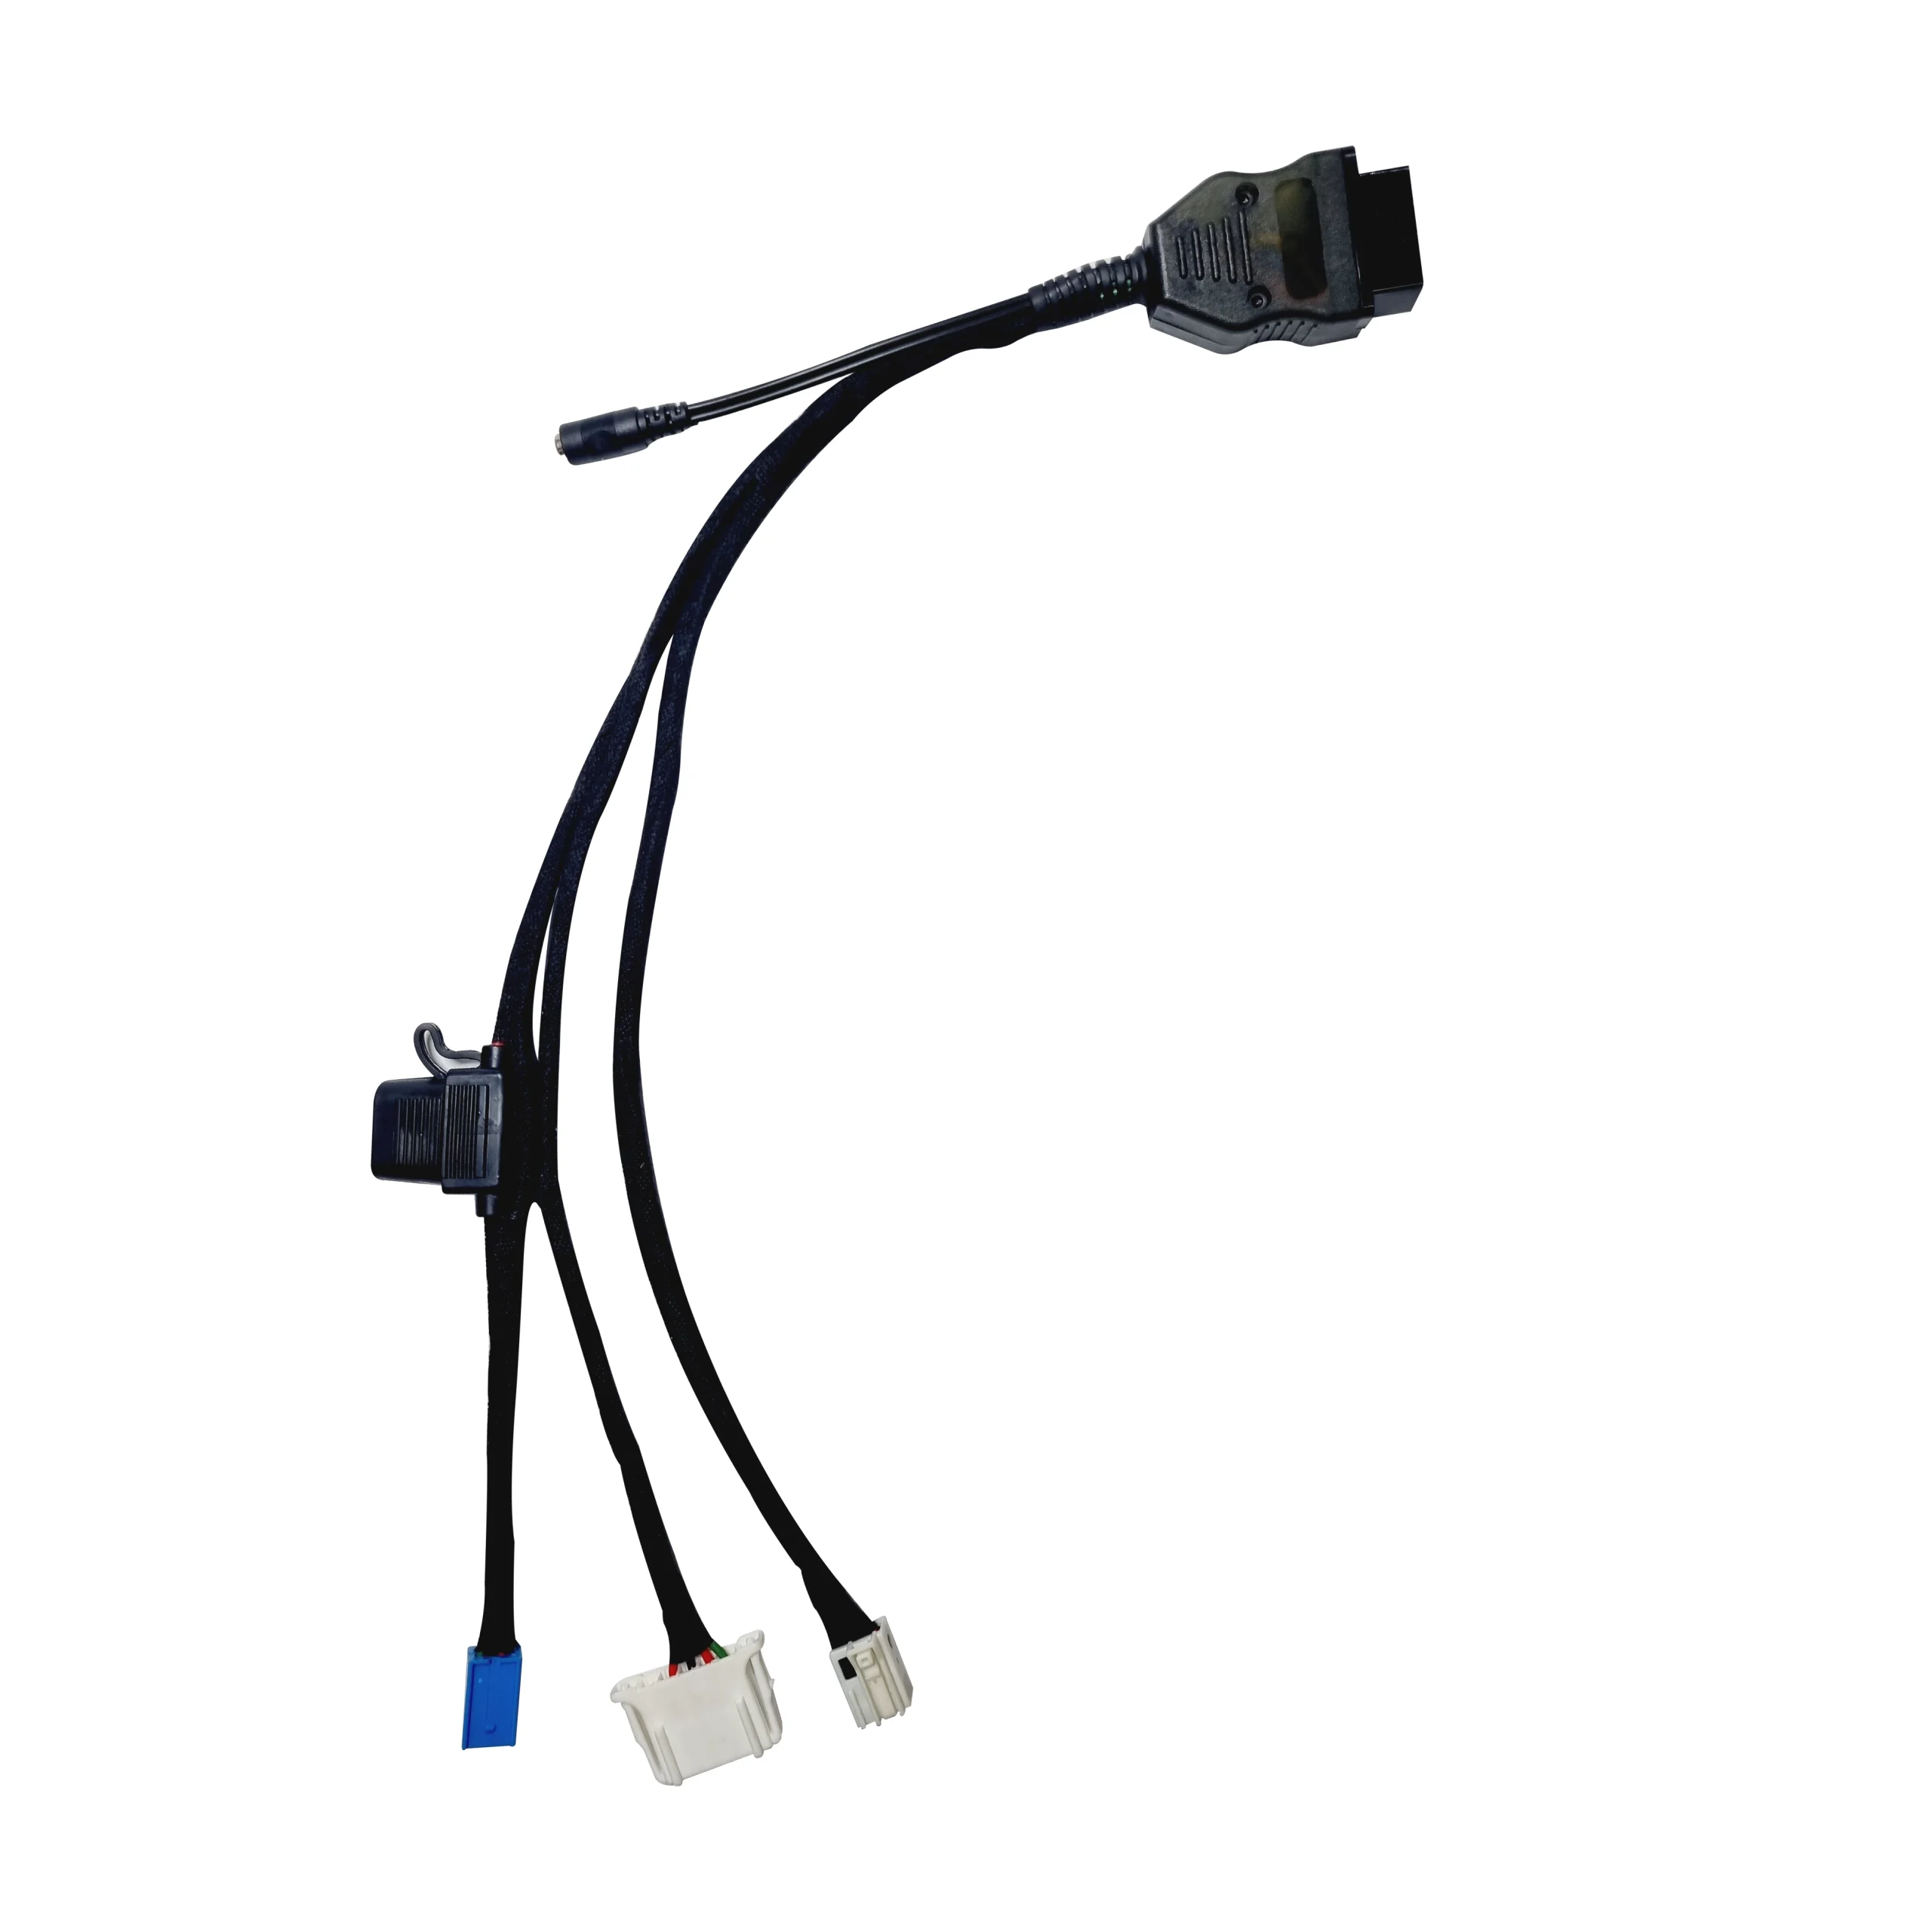 W211 W209 EIS ELV test platform cable for Mercedes-Benz works with Abrites, VVDI MB CGDI MB Autel